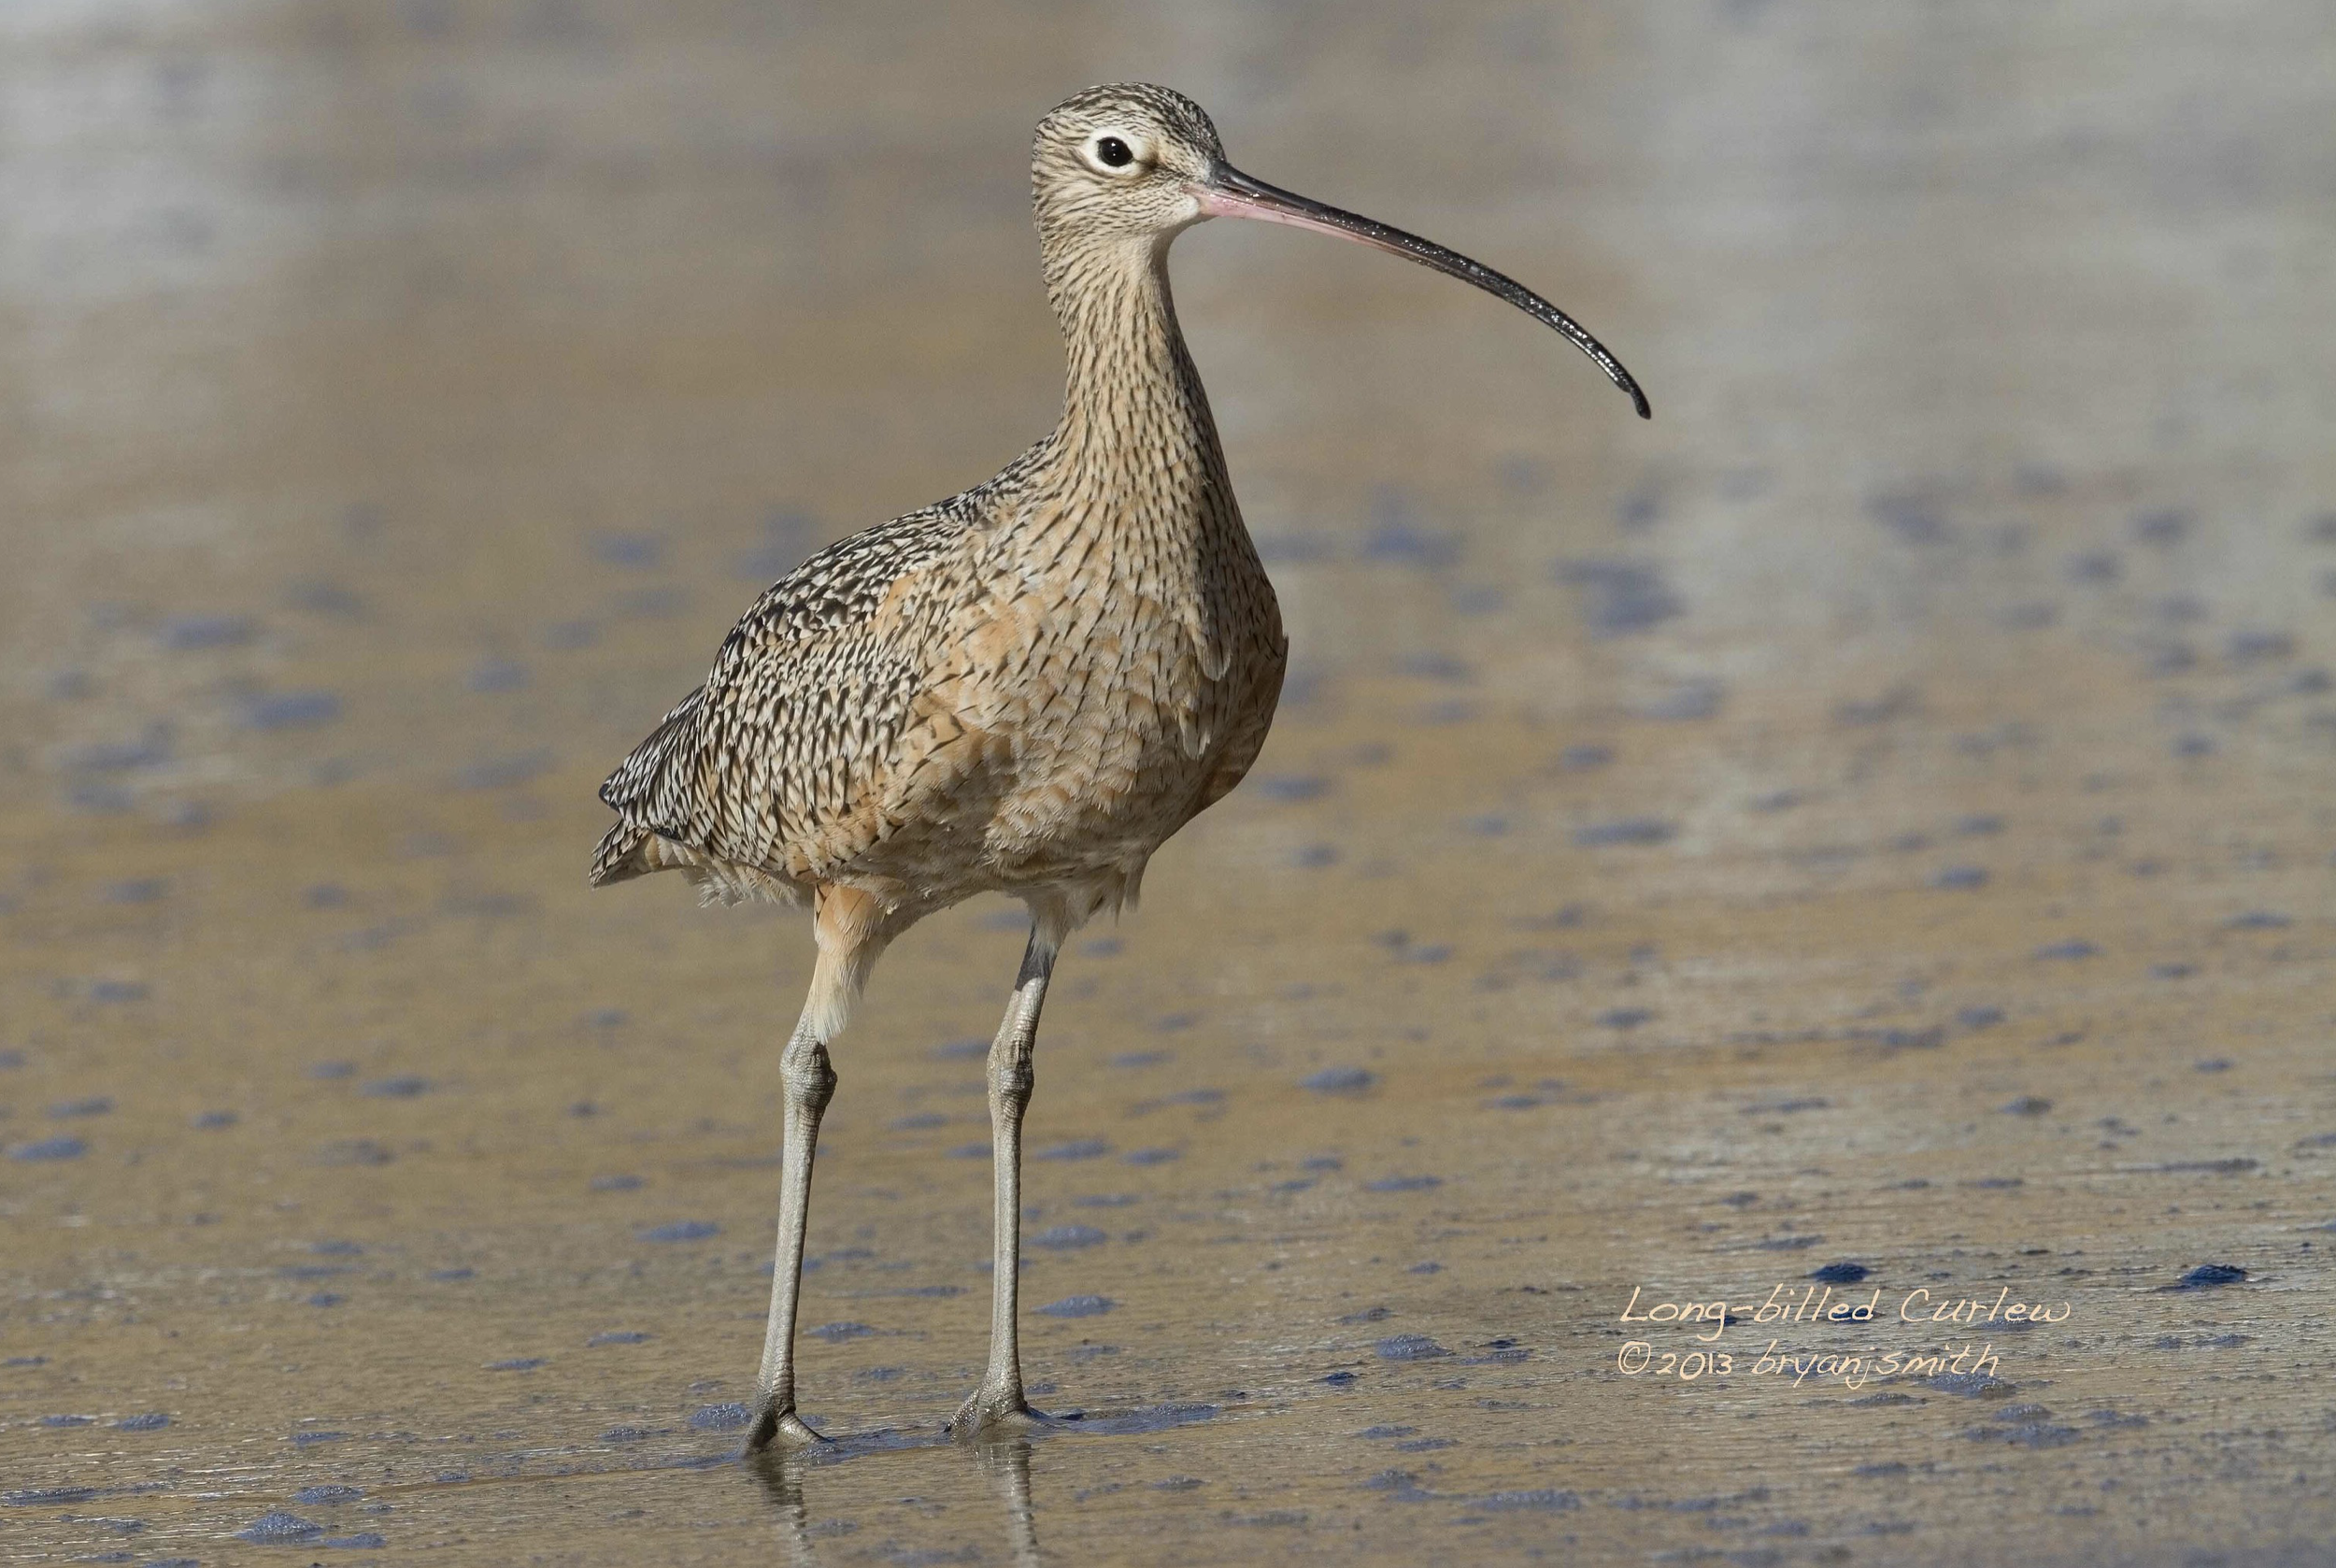 Long-billed Curlew © Bryan J. Smith